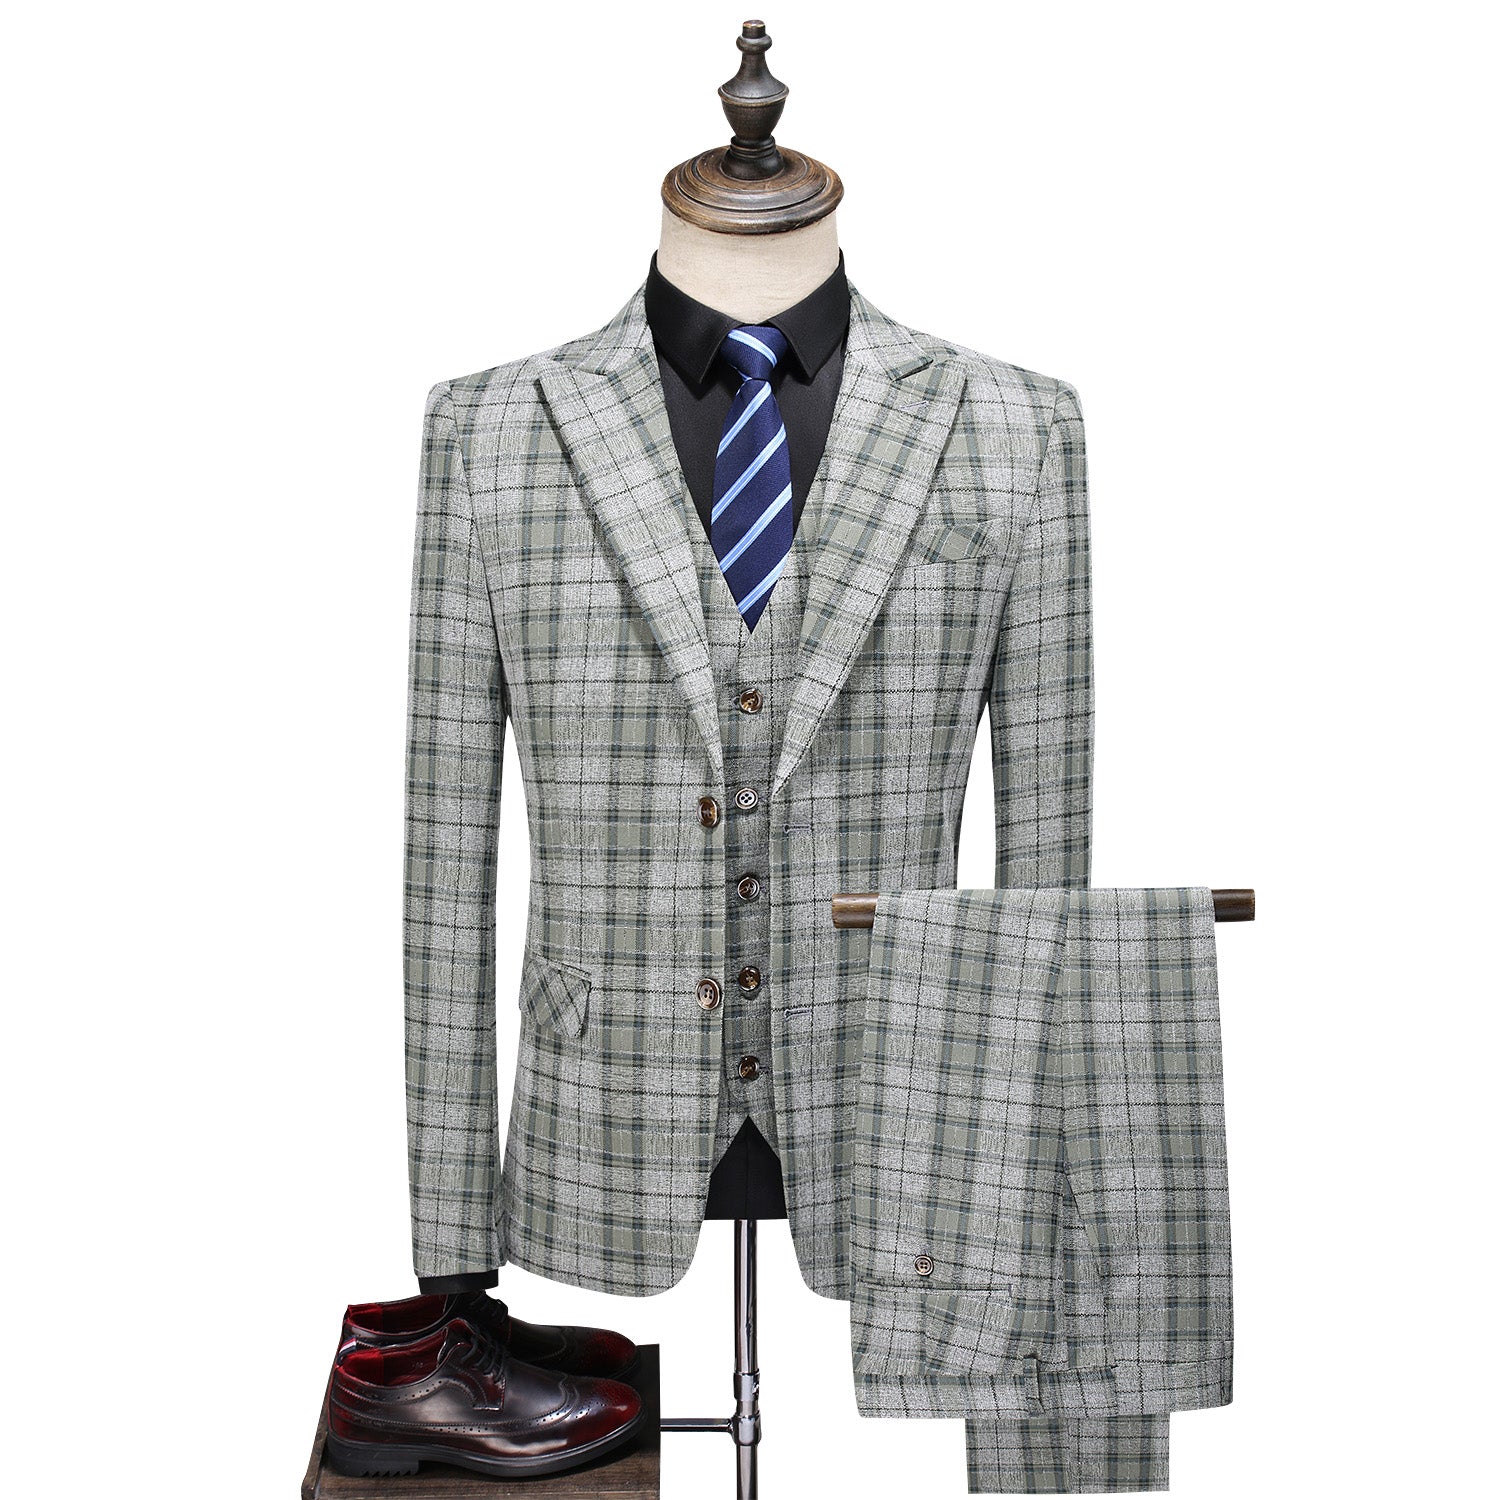 Wool Checks Business Blazer for Man, Casual Blazer for Man, Formal Blazer  for Man,wool Coat & Pant for Wedding,tweed Blazer and Pant for Man -   Canada